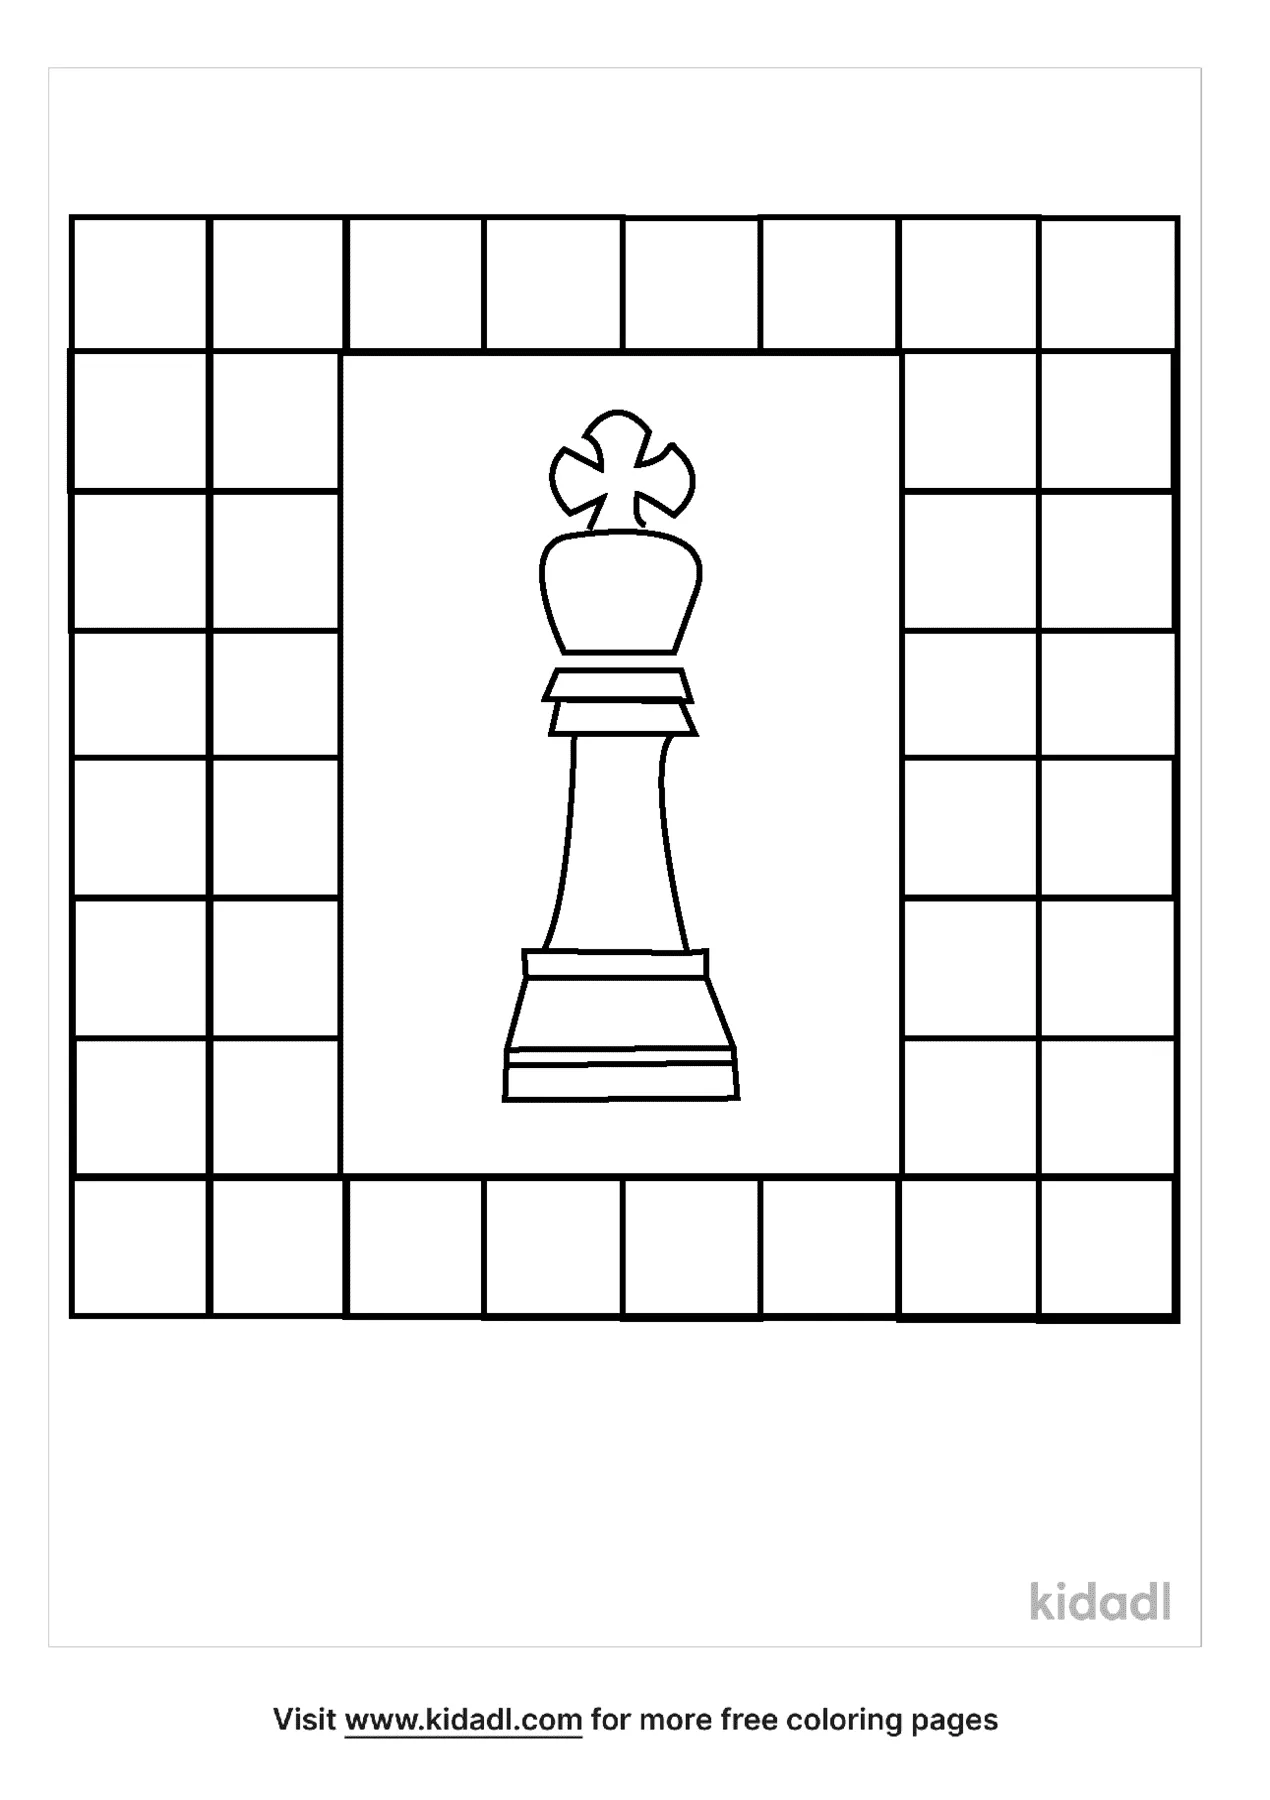 Chess King Coloring Page